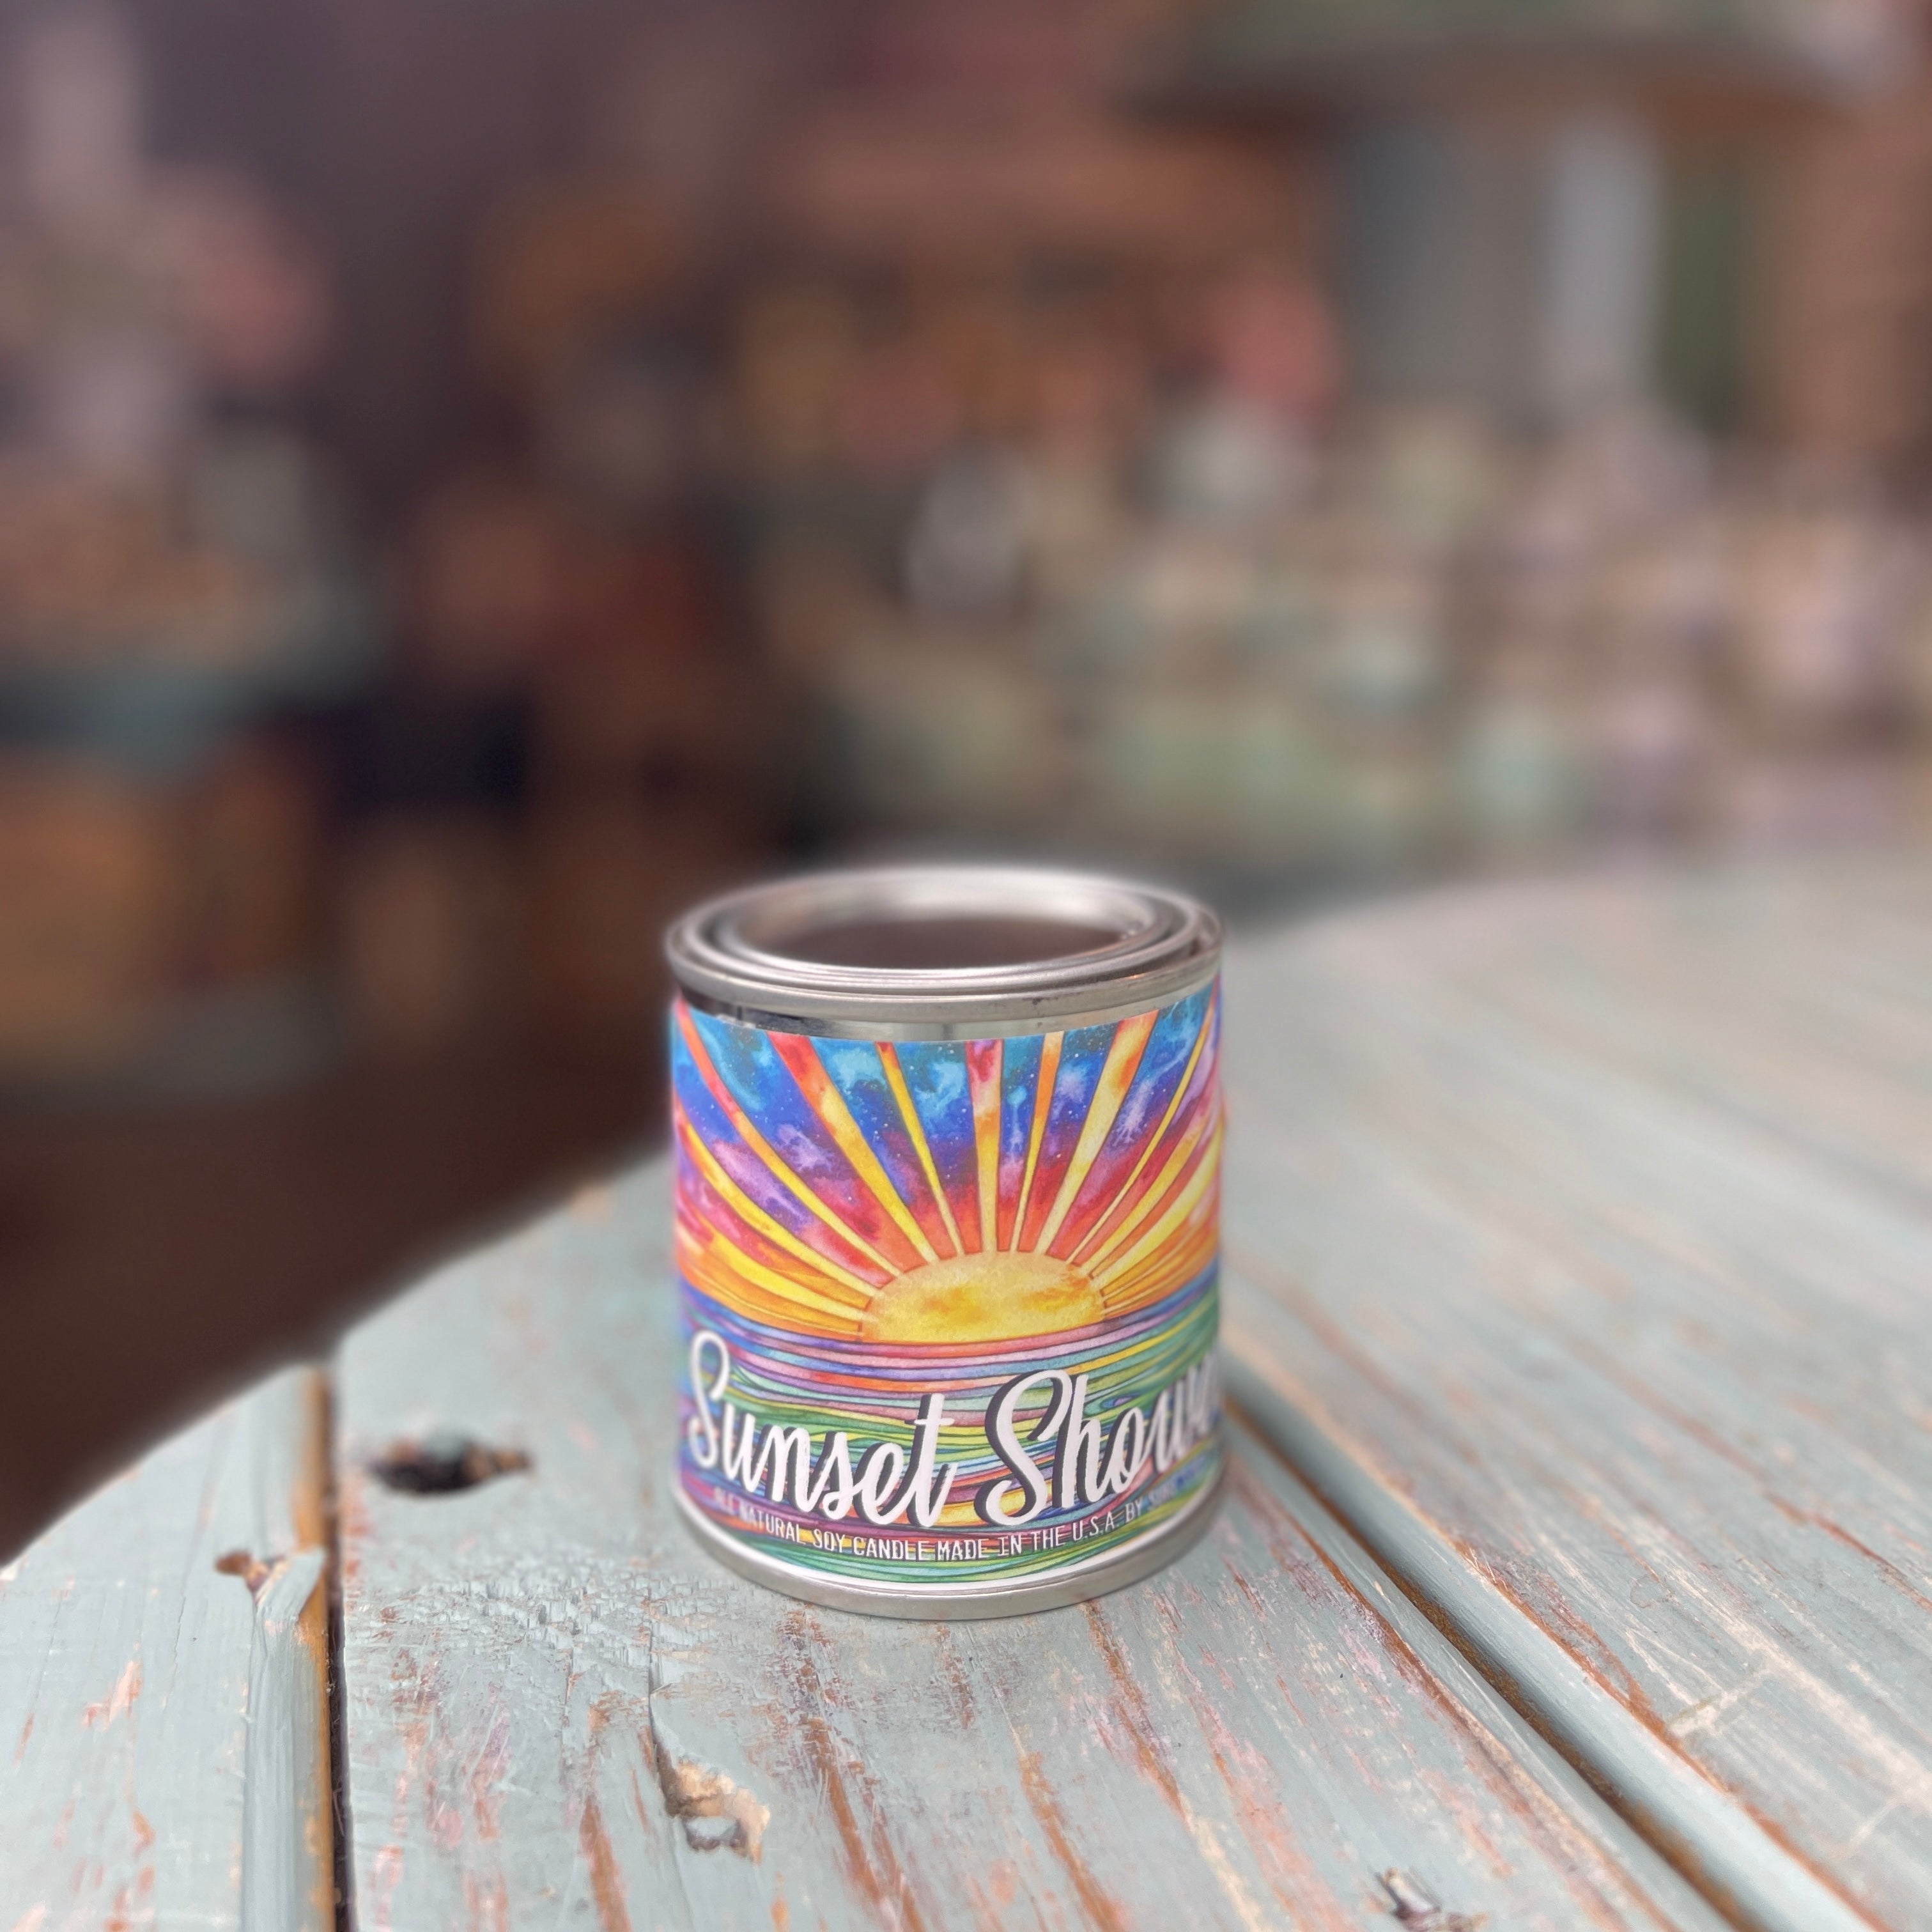 Sunset Showers Paint Can Candle - Vintage Collection